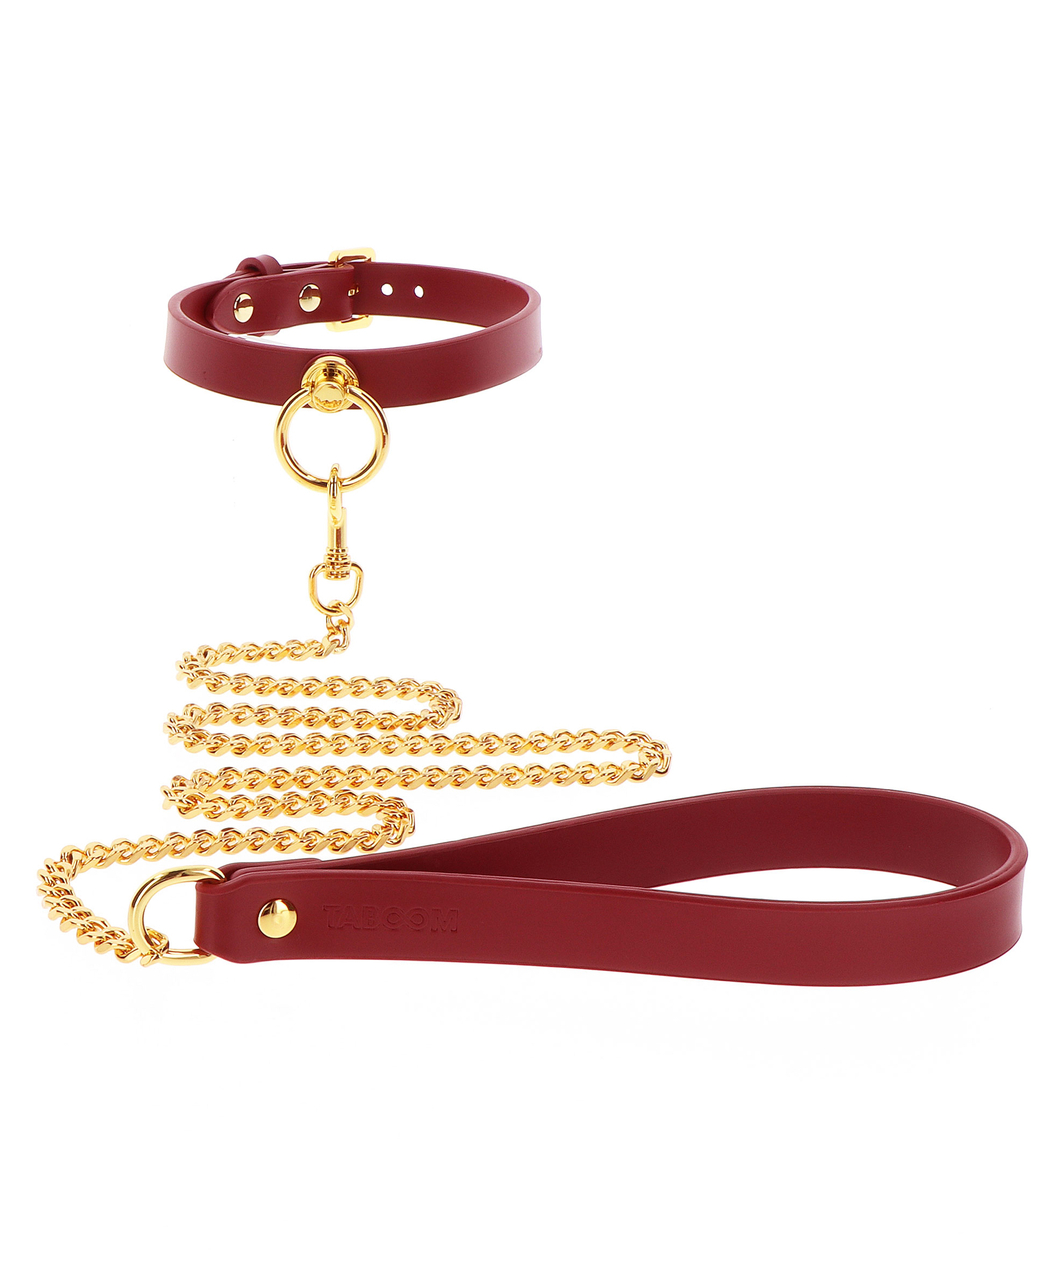 Taboom burgundy faux leather collar with leash